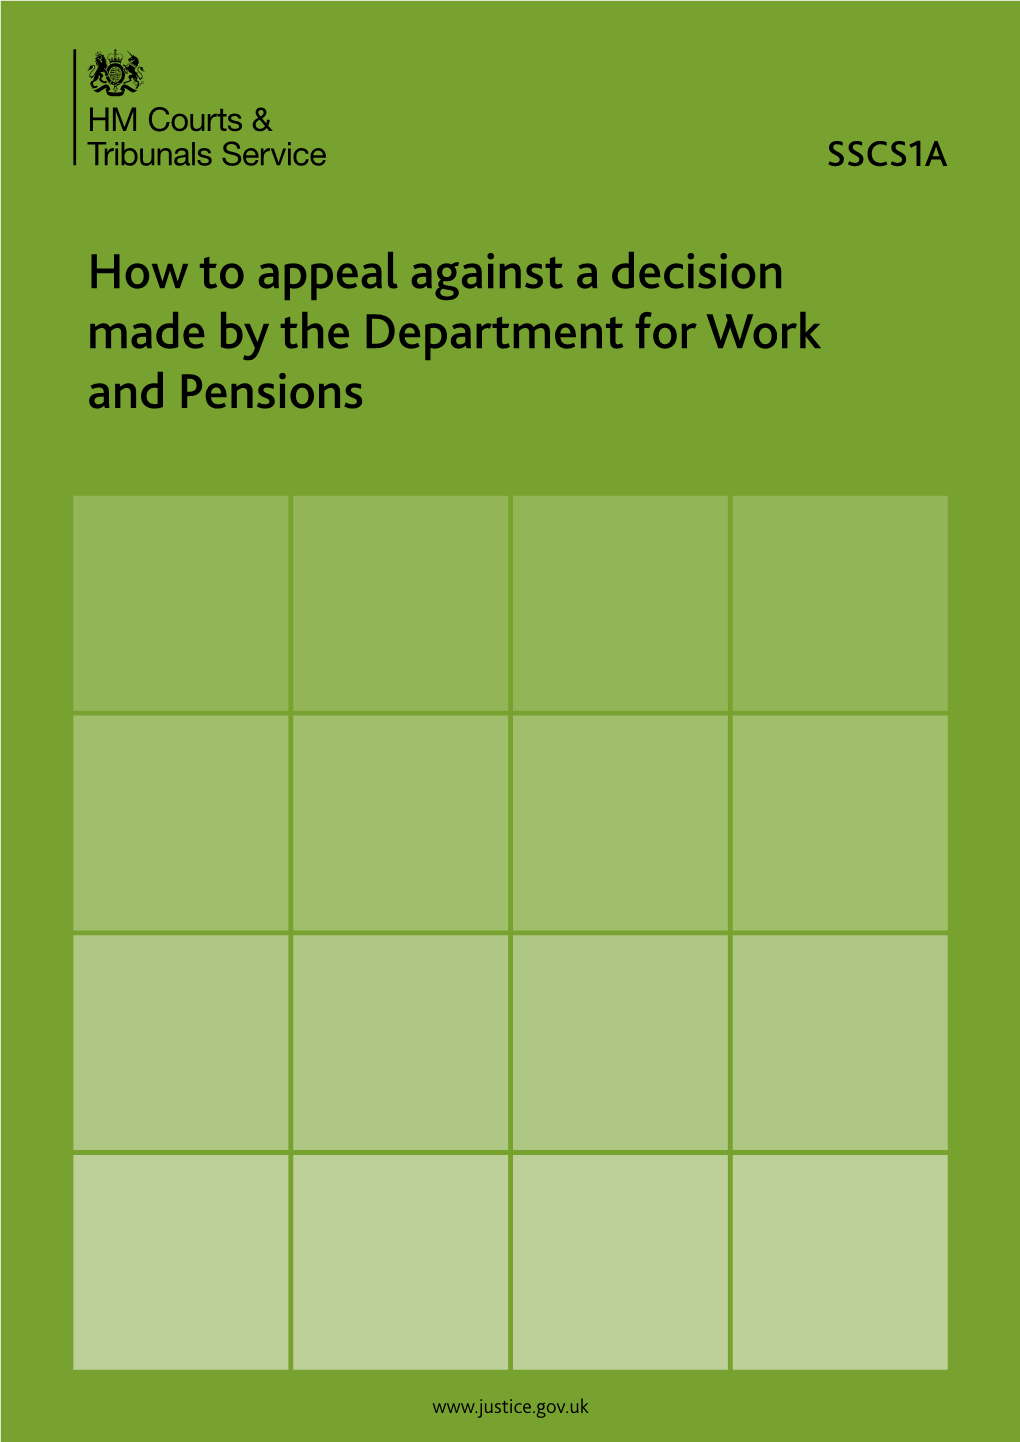 How to Appeal Against a Decision Made by the Department for Work and Pensions